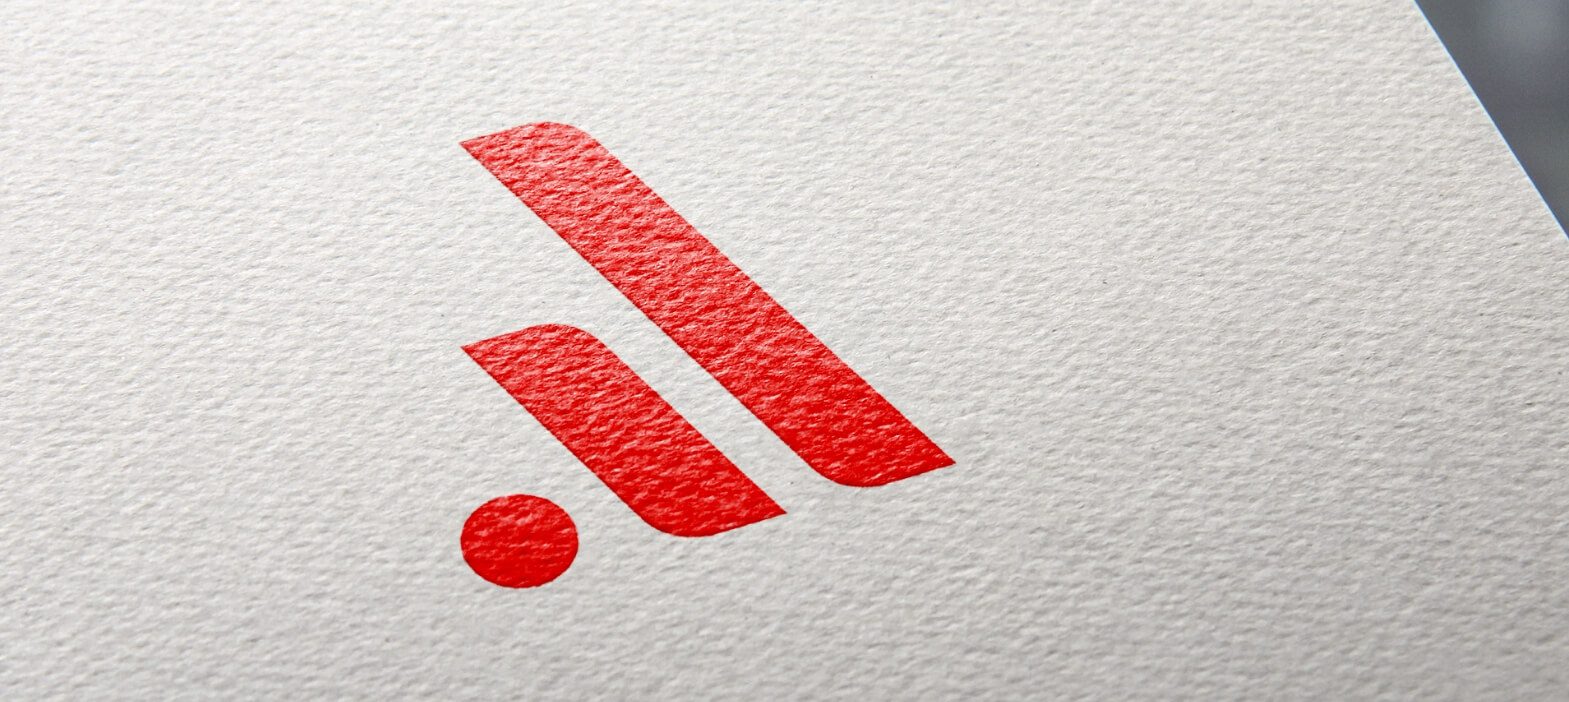 Admail West logo mark printed on paper